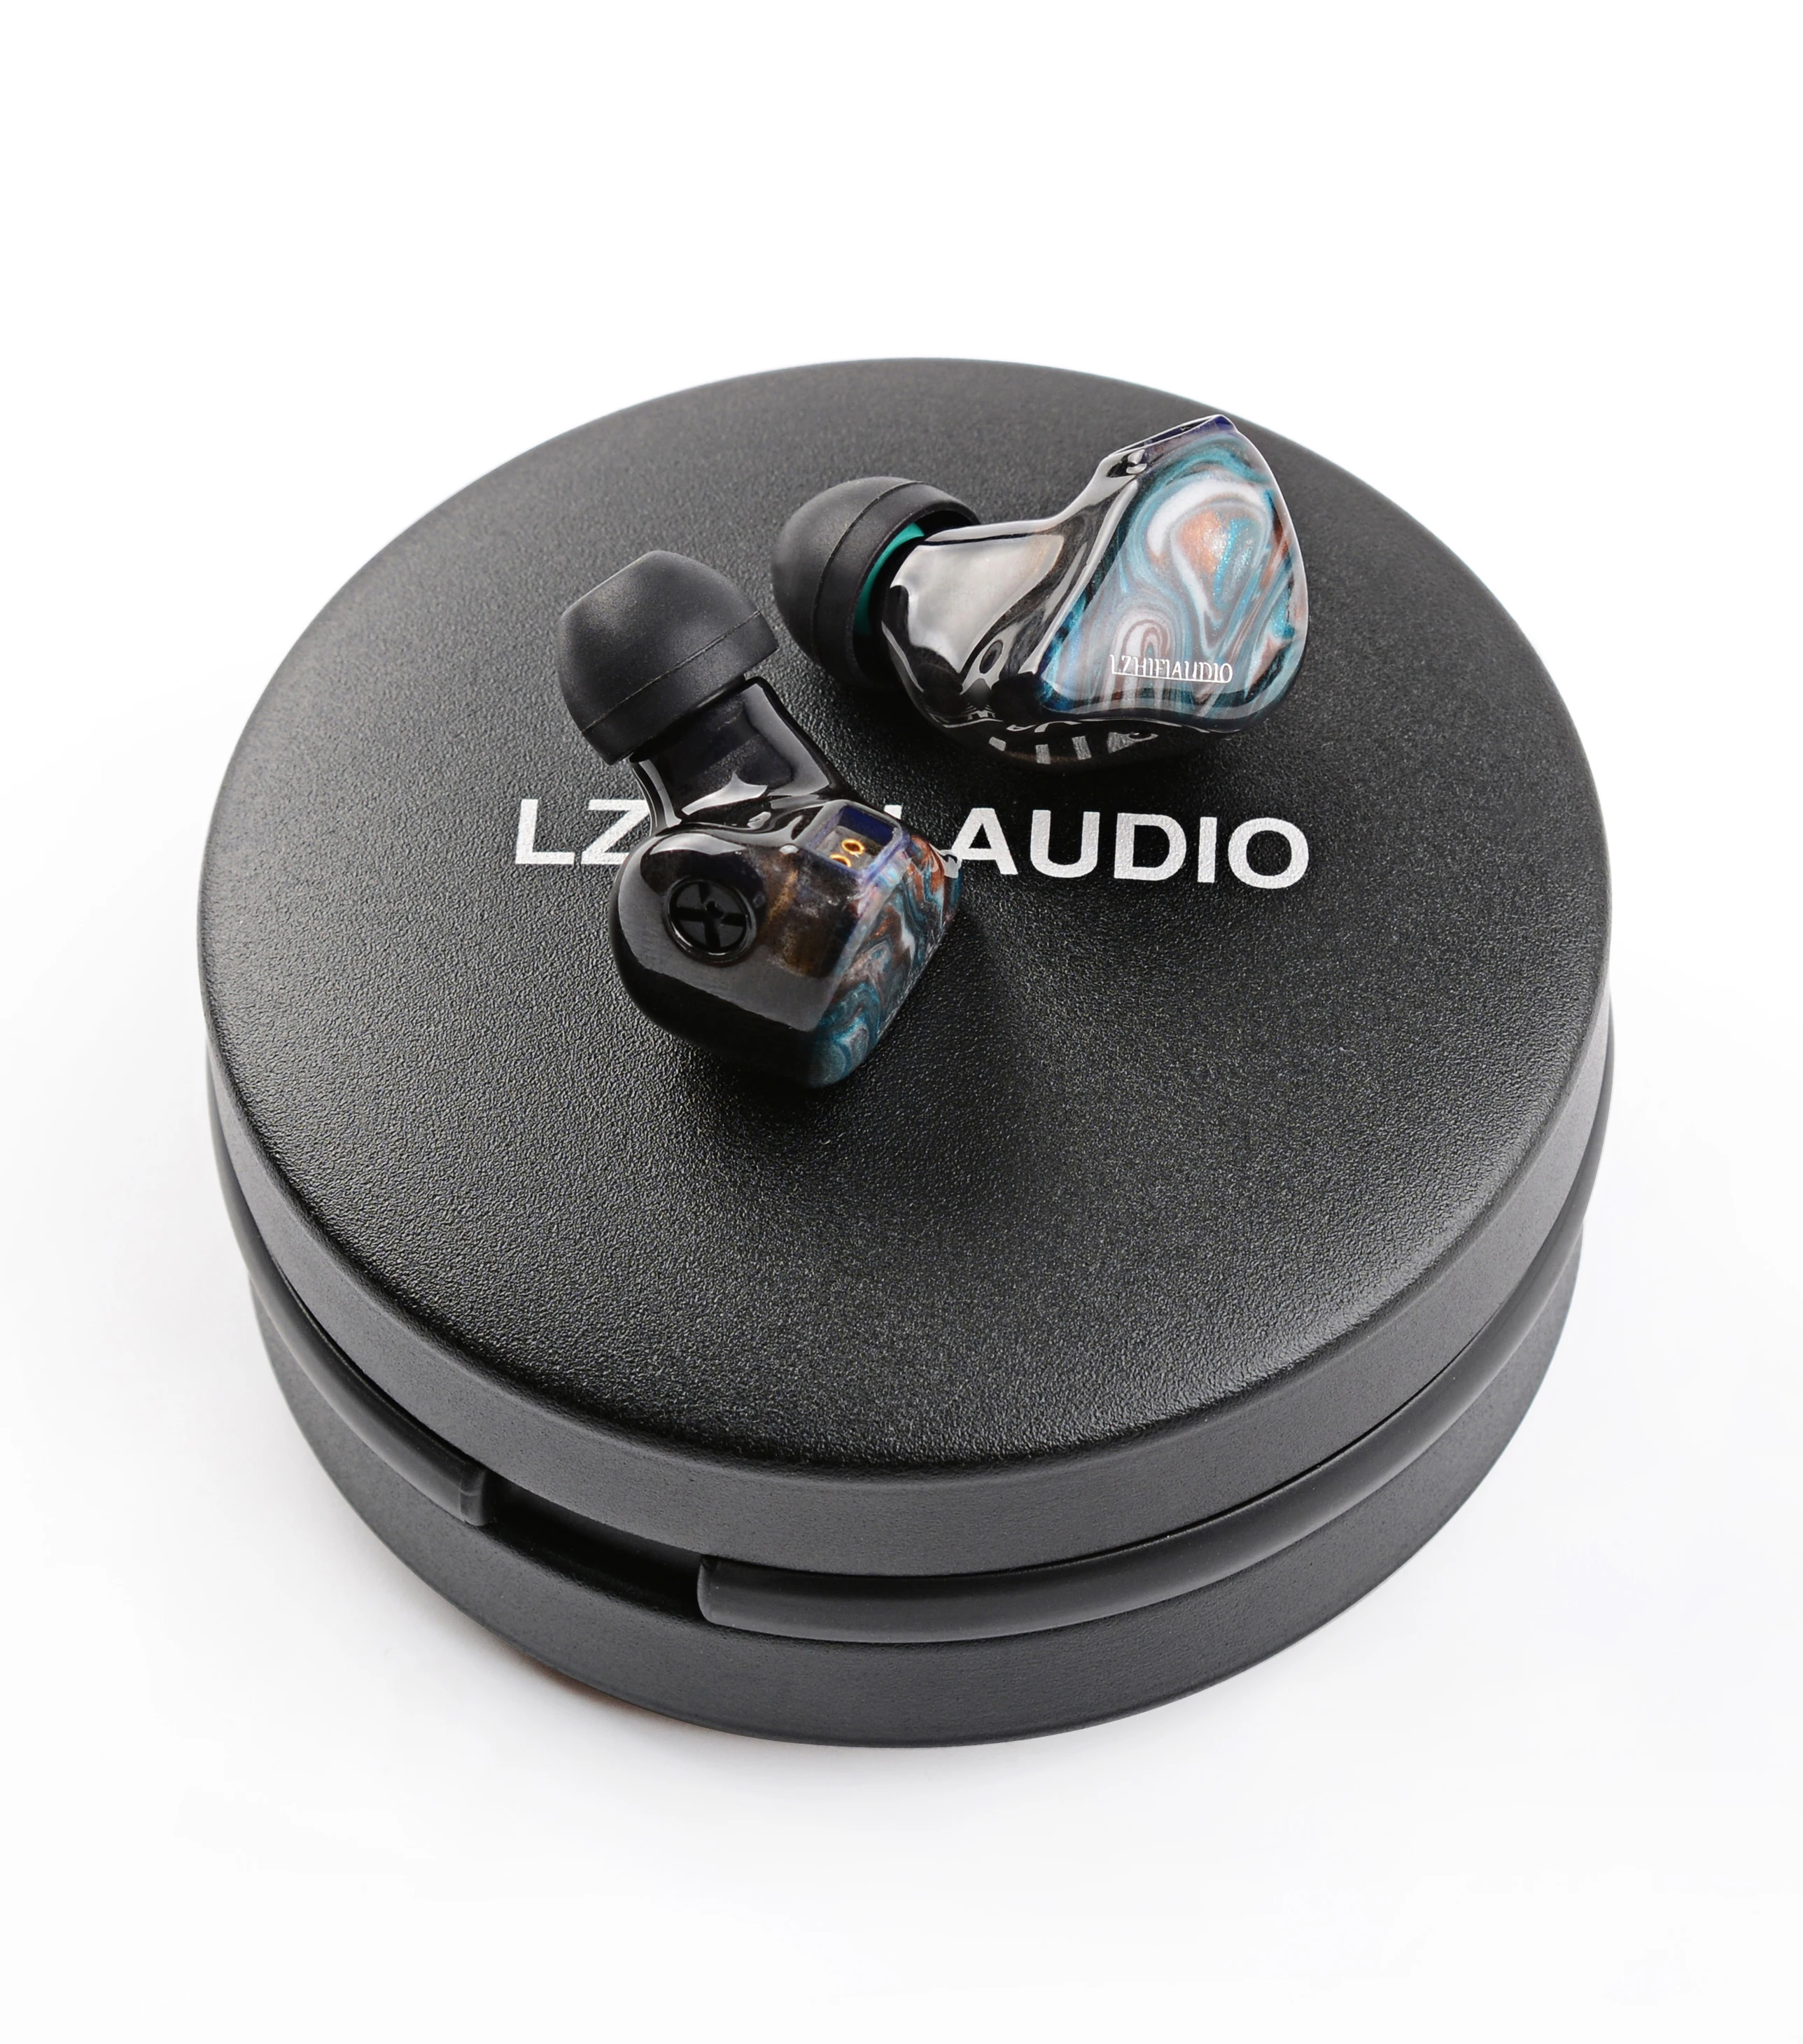 LZ A4 PRO 4 Hybrid Driver Unit Earphone 1 CNT Diaphragm DD+3 Knowles BA HIFI Resin Audiophile Earbud With 2Pin Detachable Cable images - 6